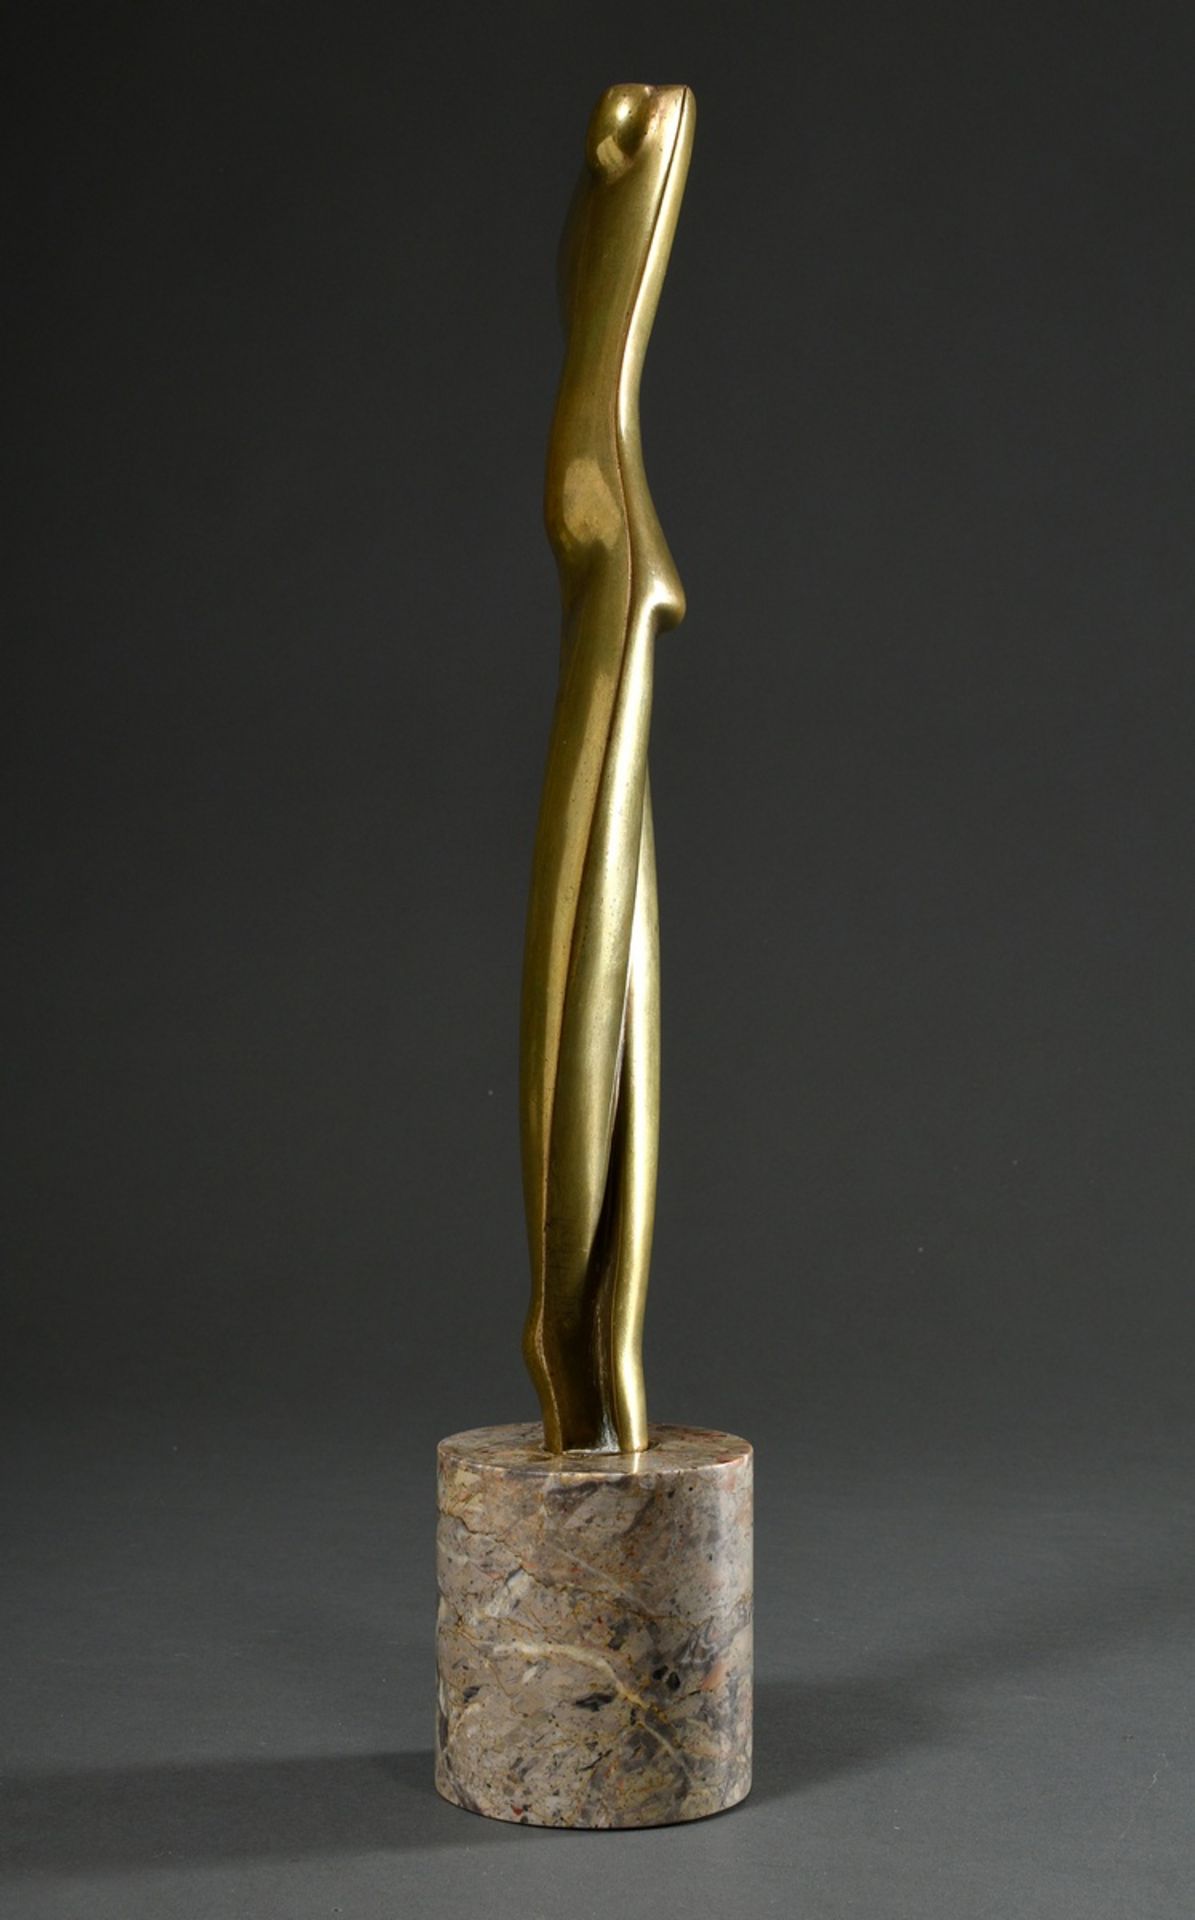 Archipenko, Alexander (1887-1964) "Flat Torso" 1914, early life cast around 1920, bronze with gold- - Image 6 of 17